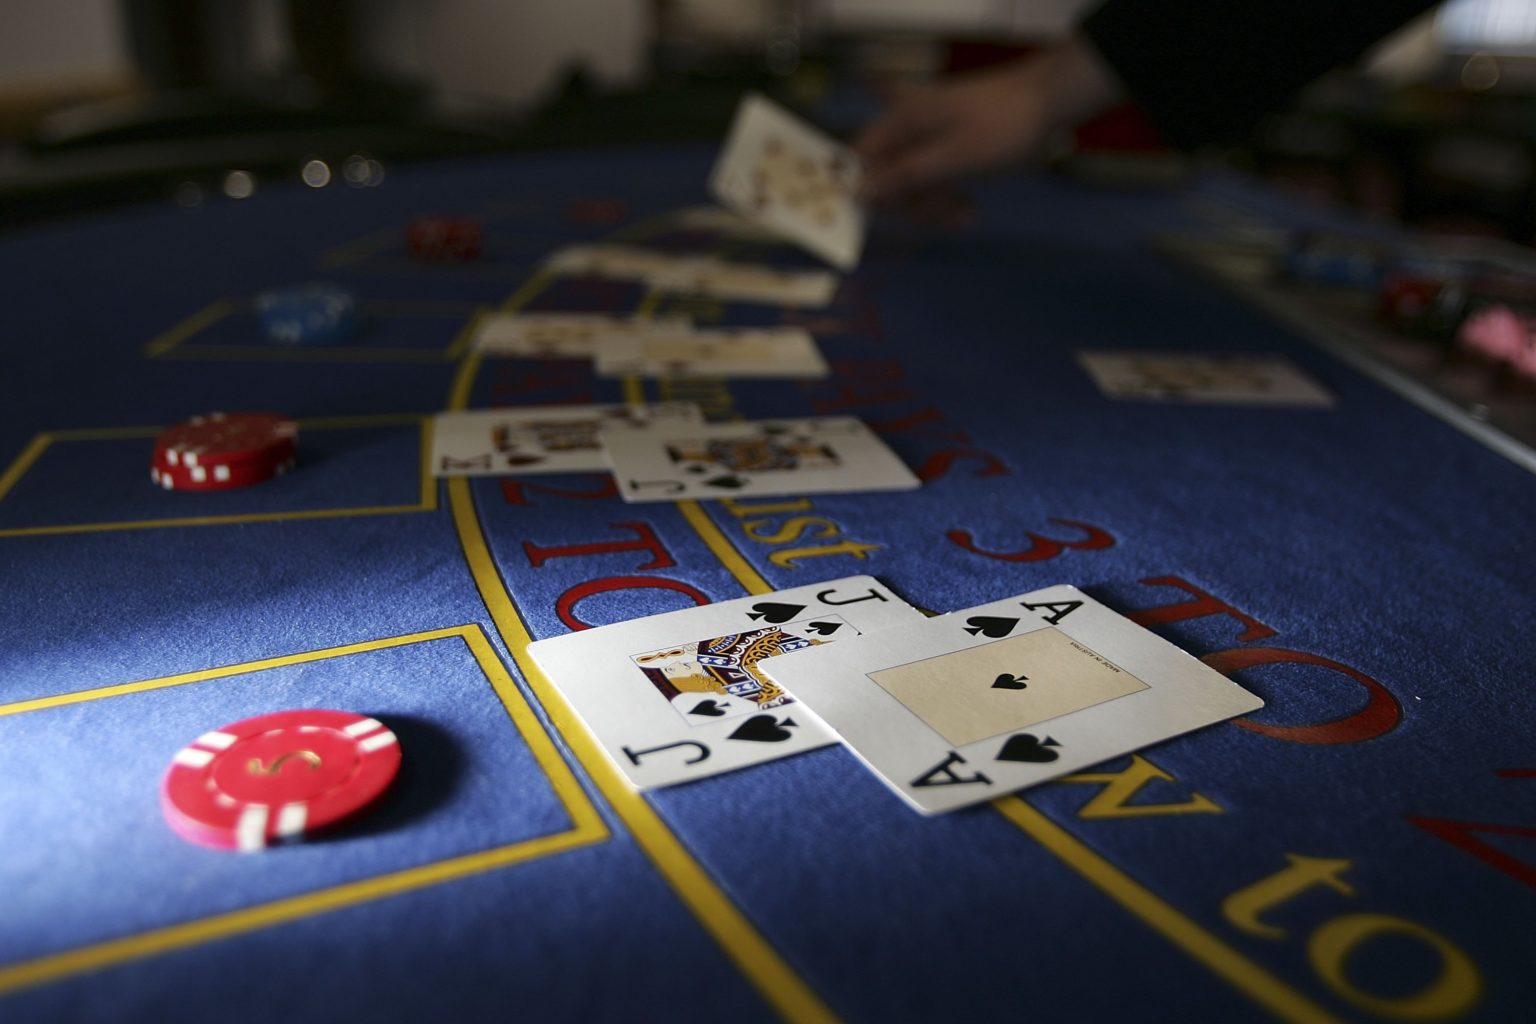 best online casinos with fast payouts